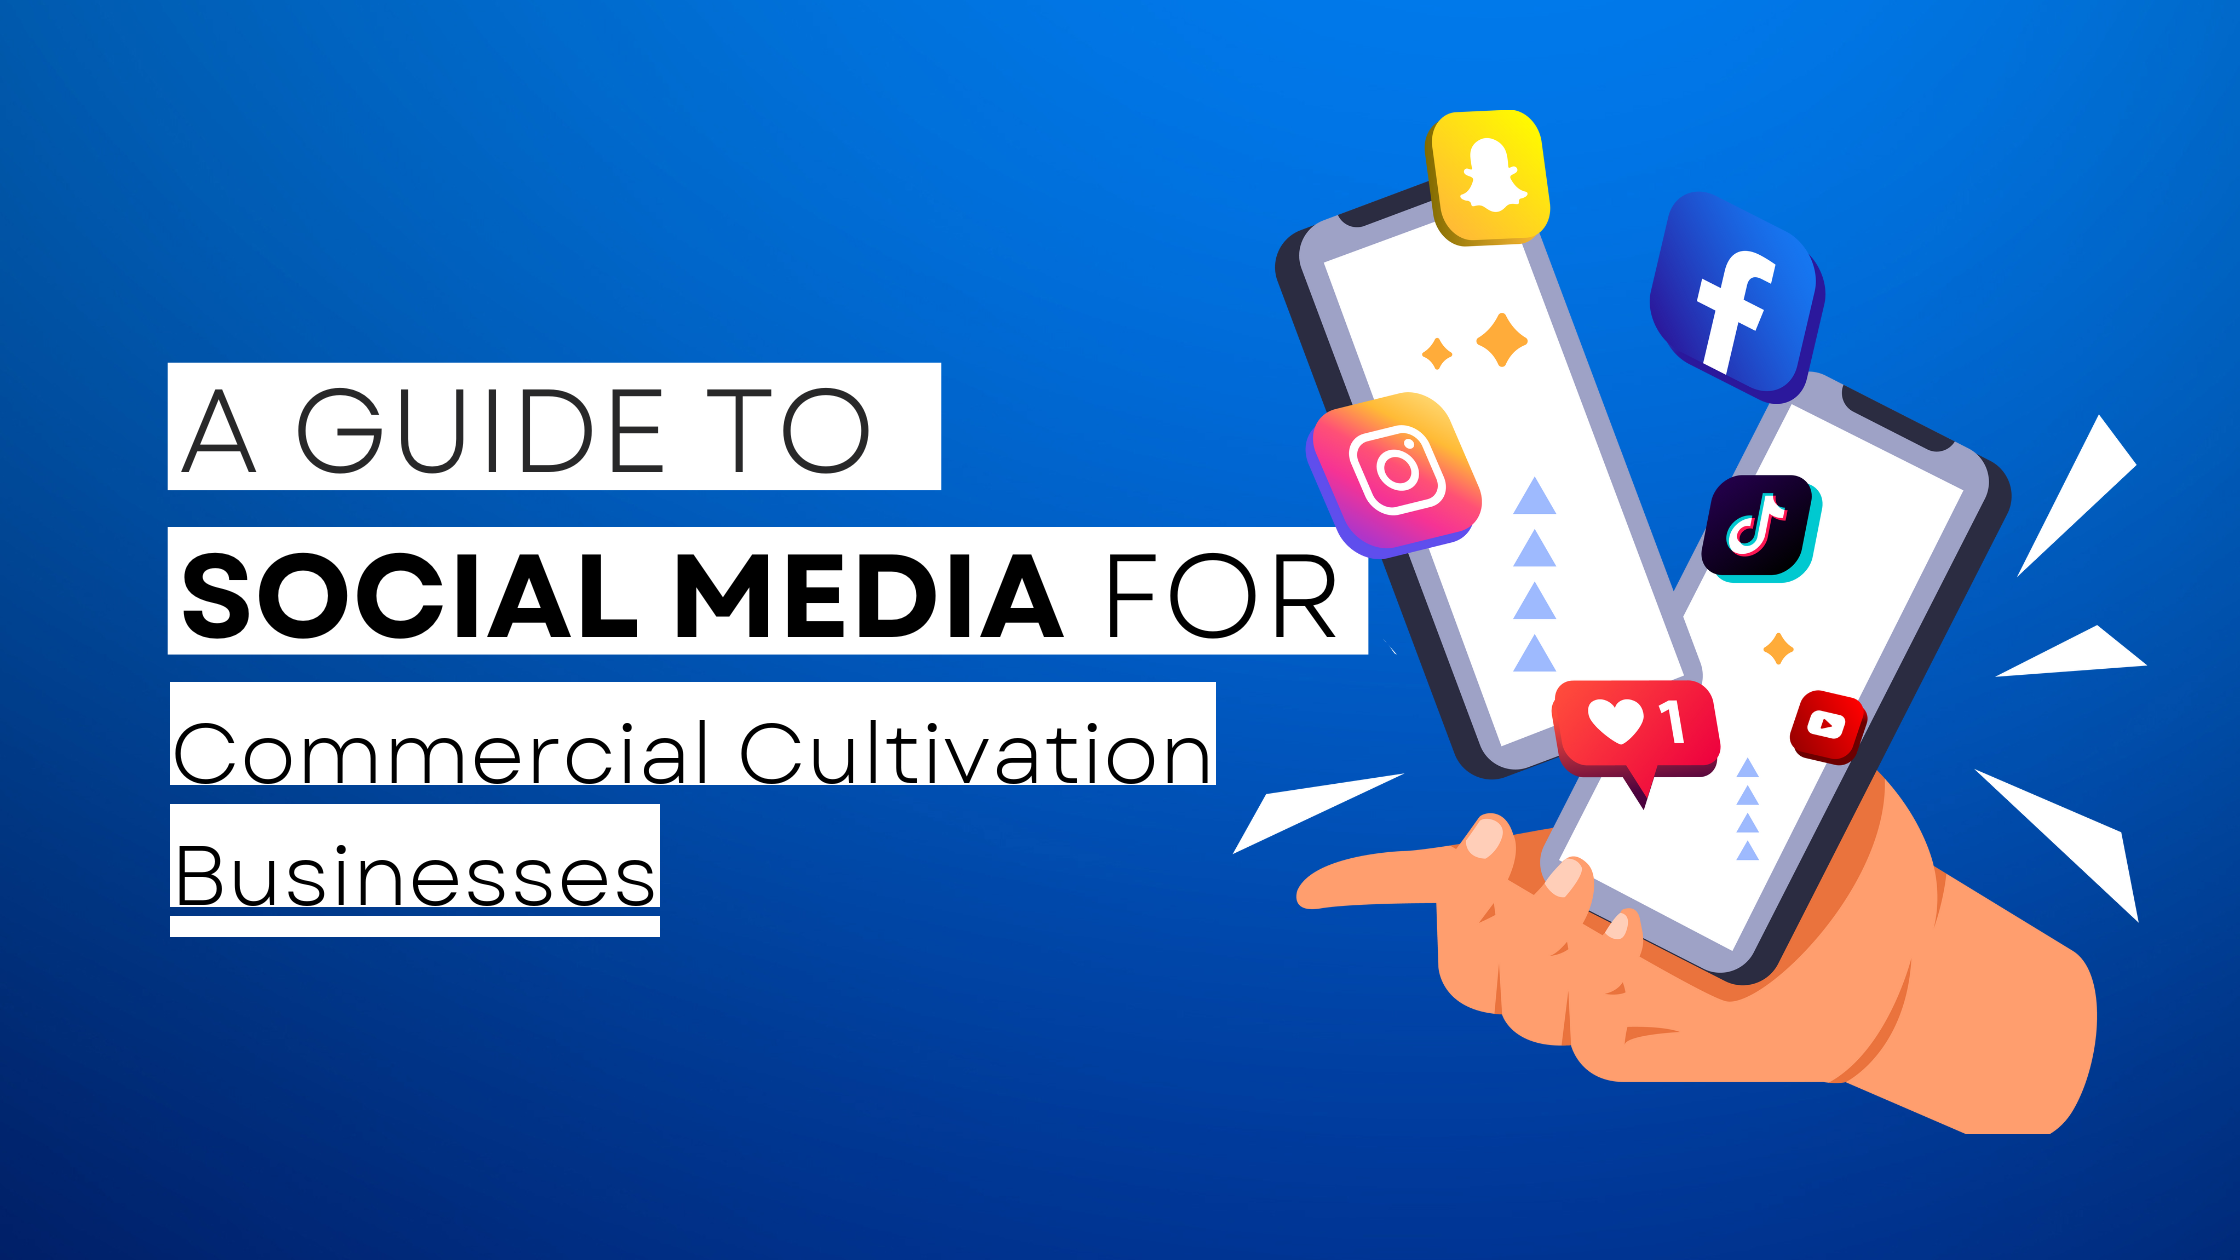 How to start Commercial Cultivation on social media